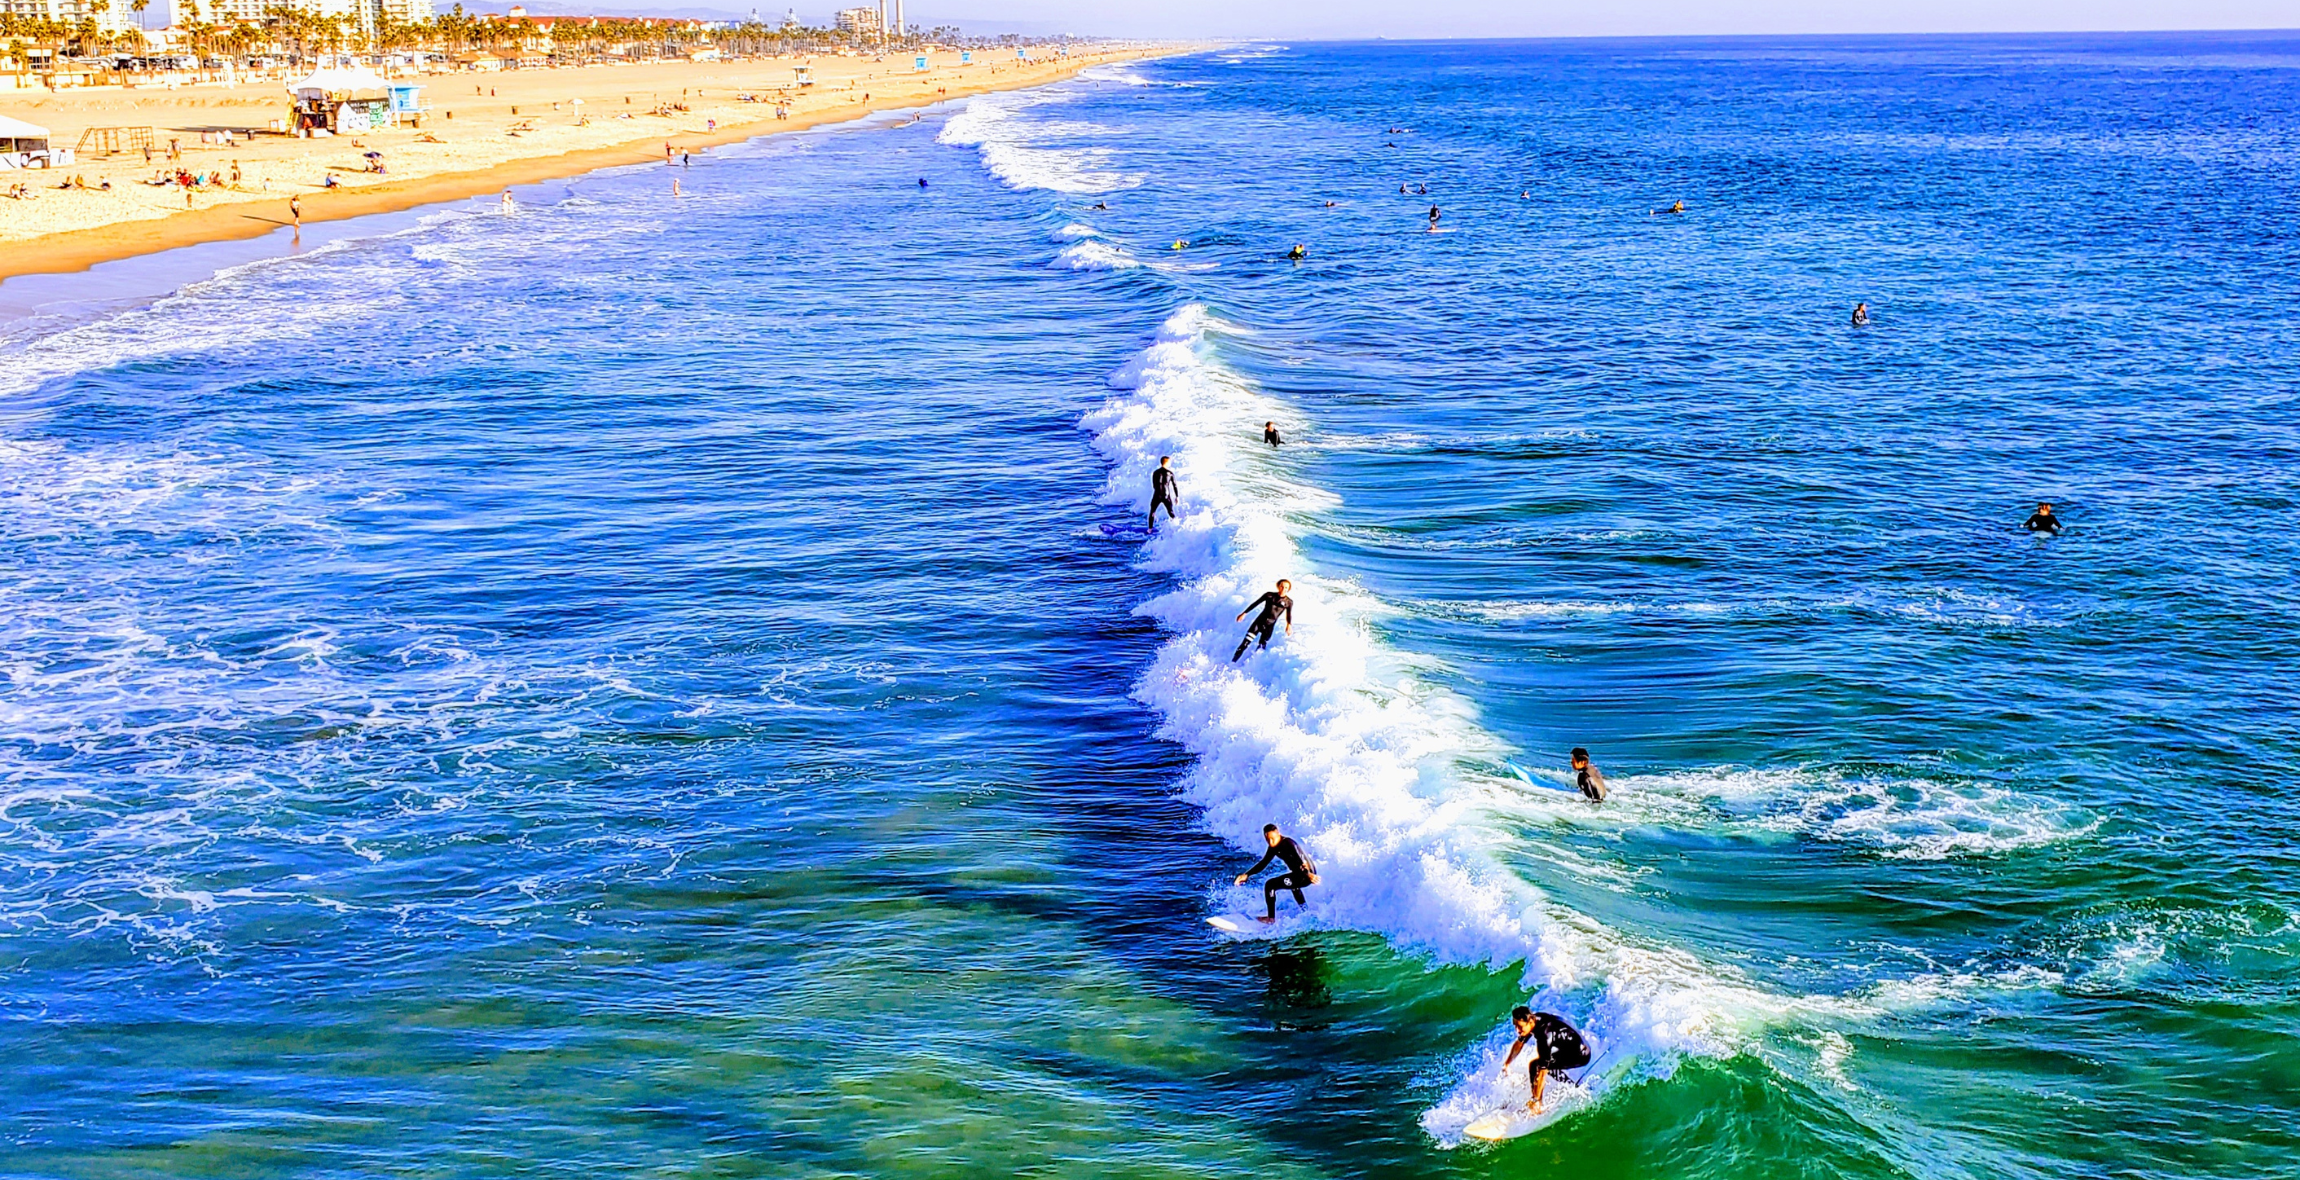 Multiple surfers ride a wave in the ocean in Huntington Beach California